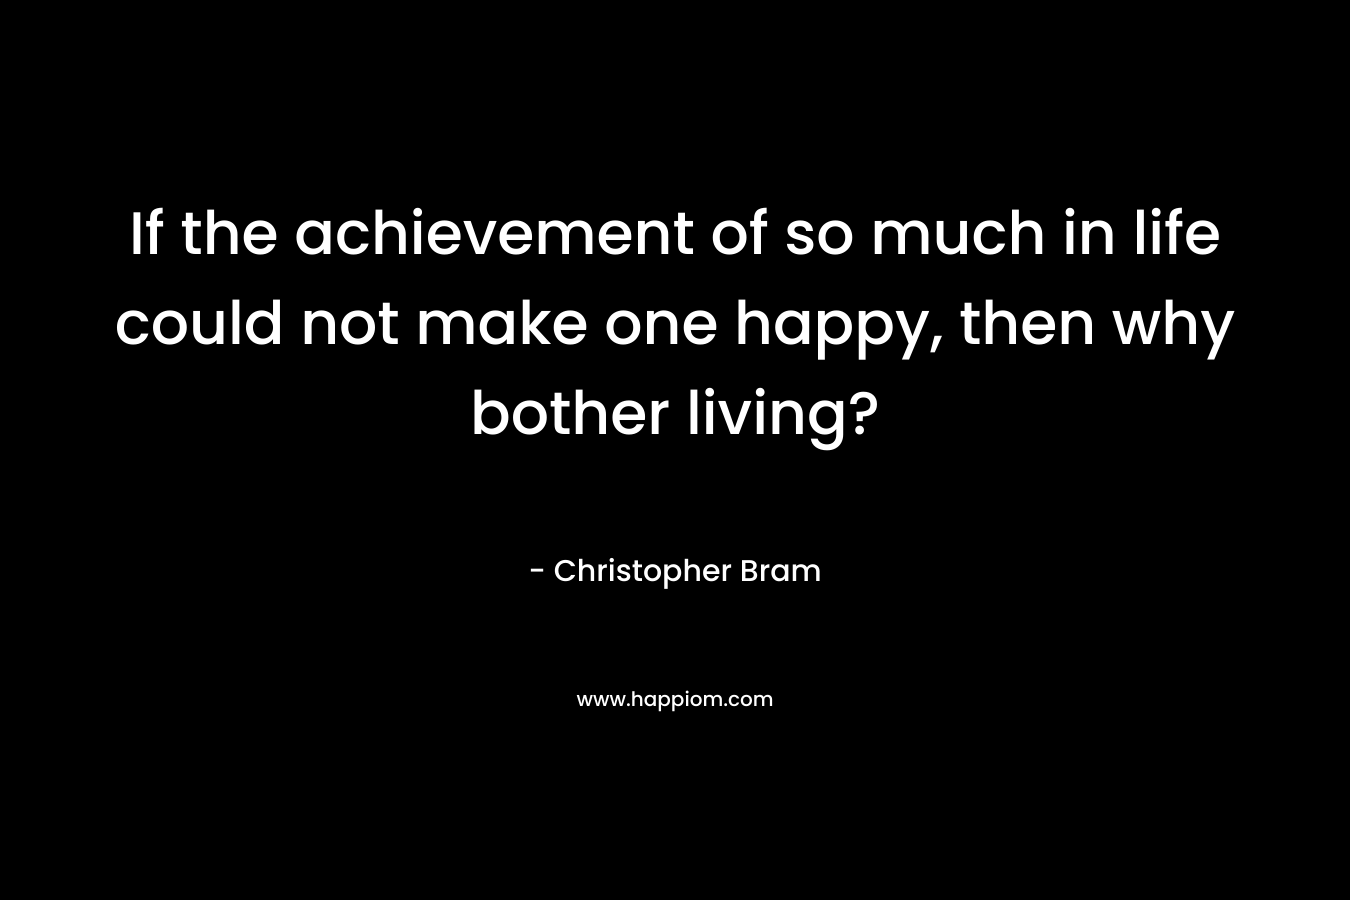 If the achievement of so much in life could not make one happy, then why bother living?